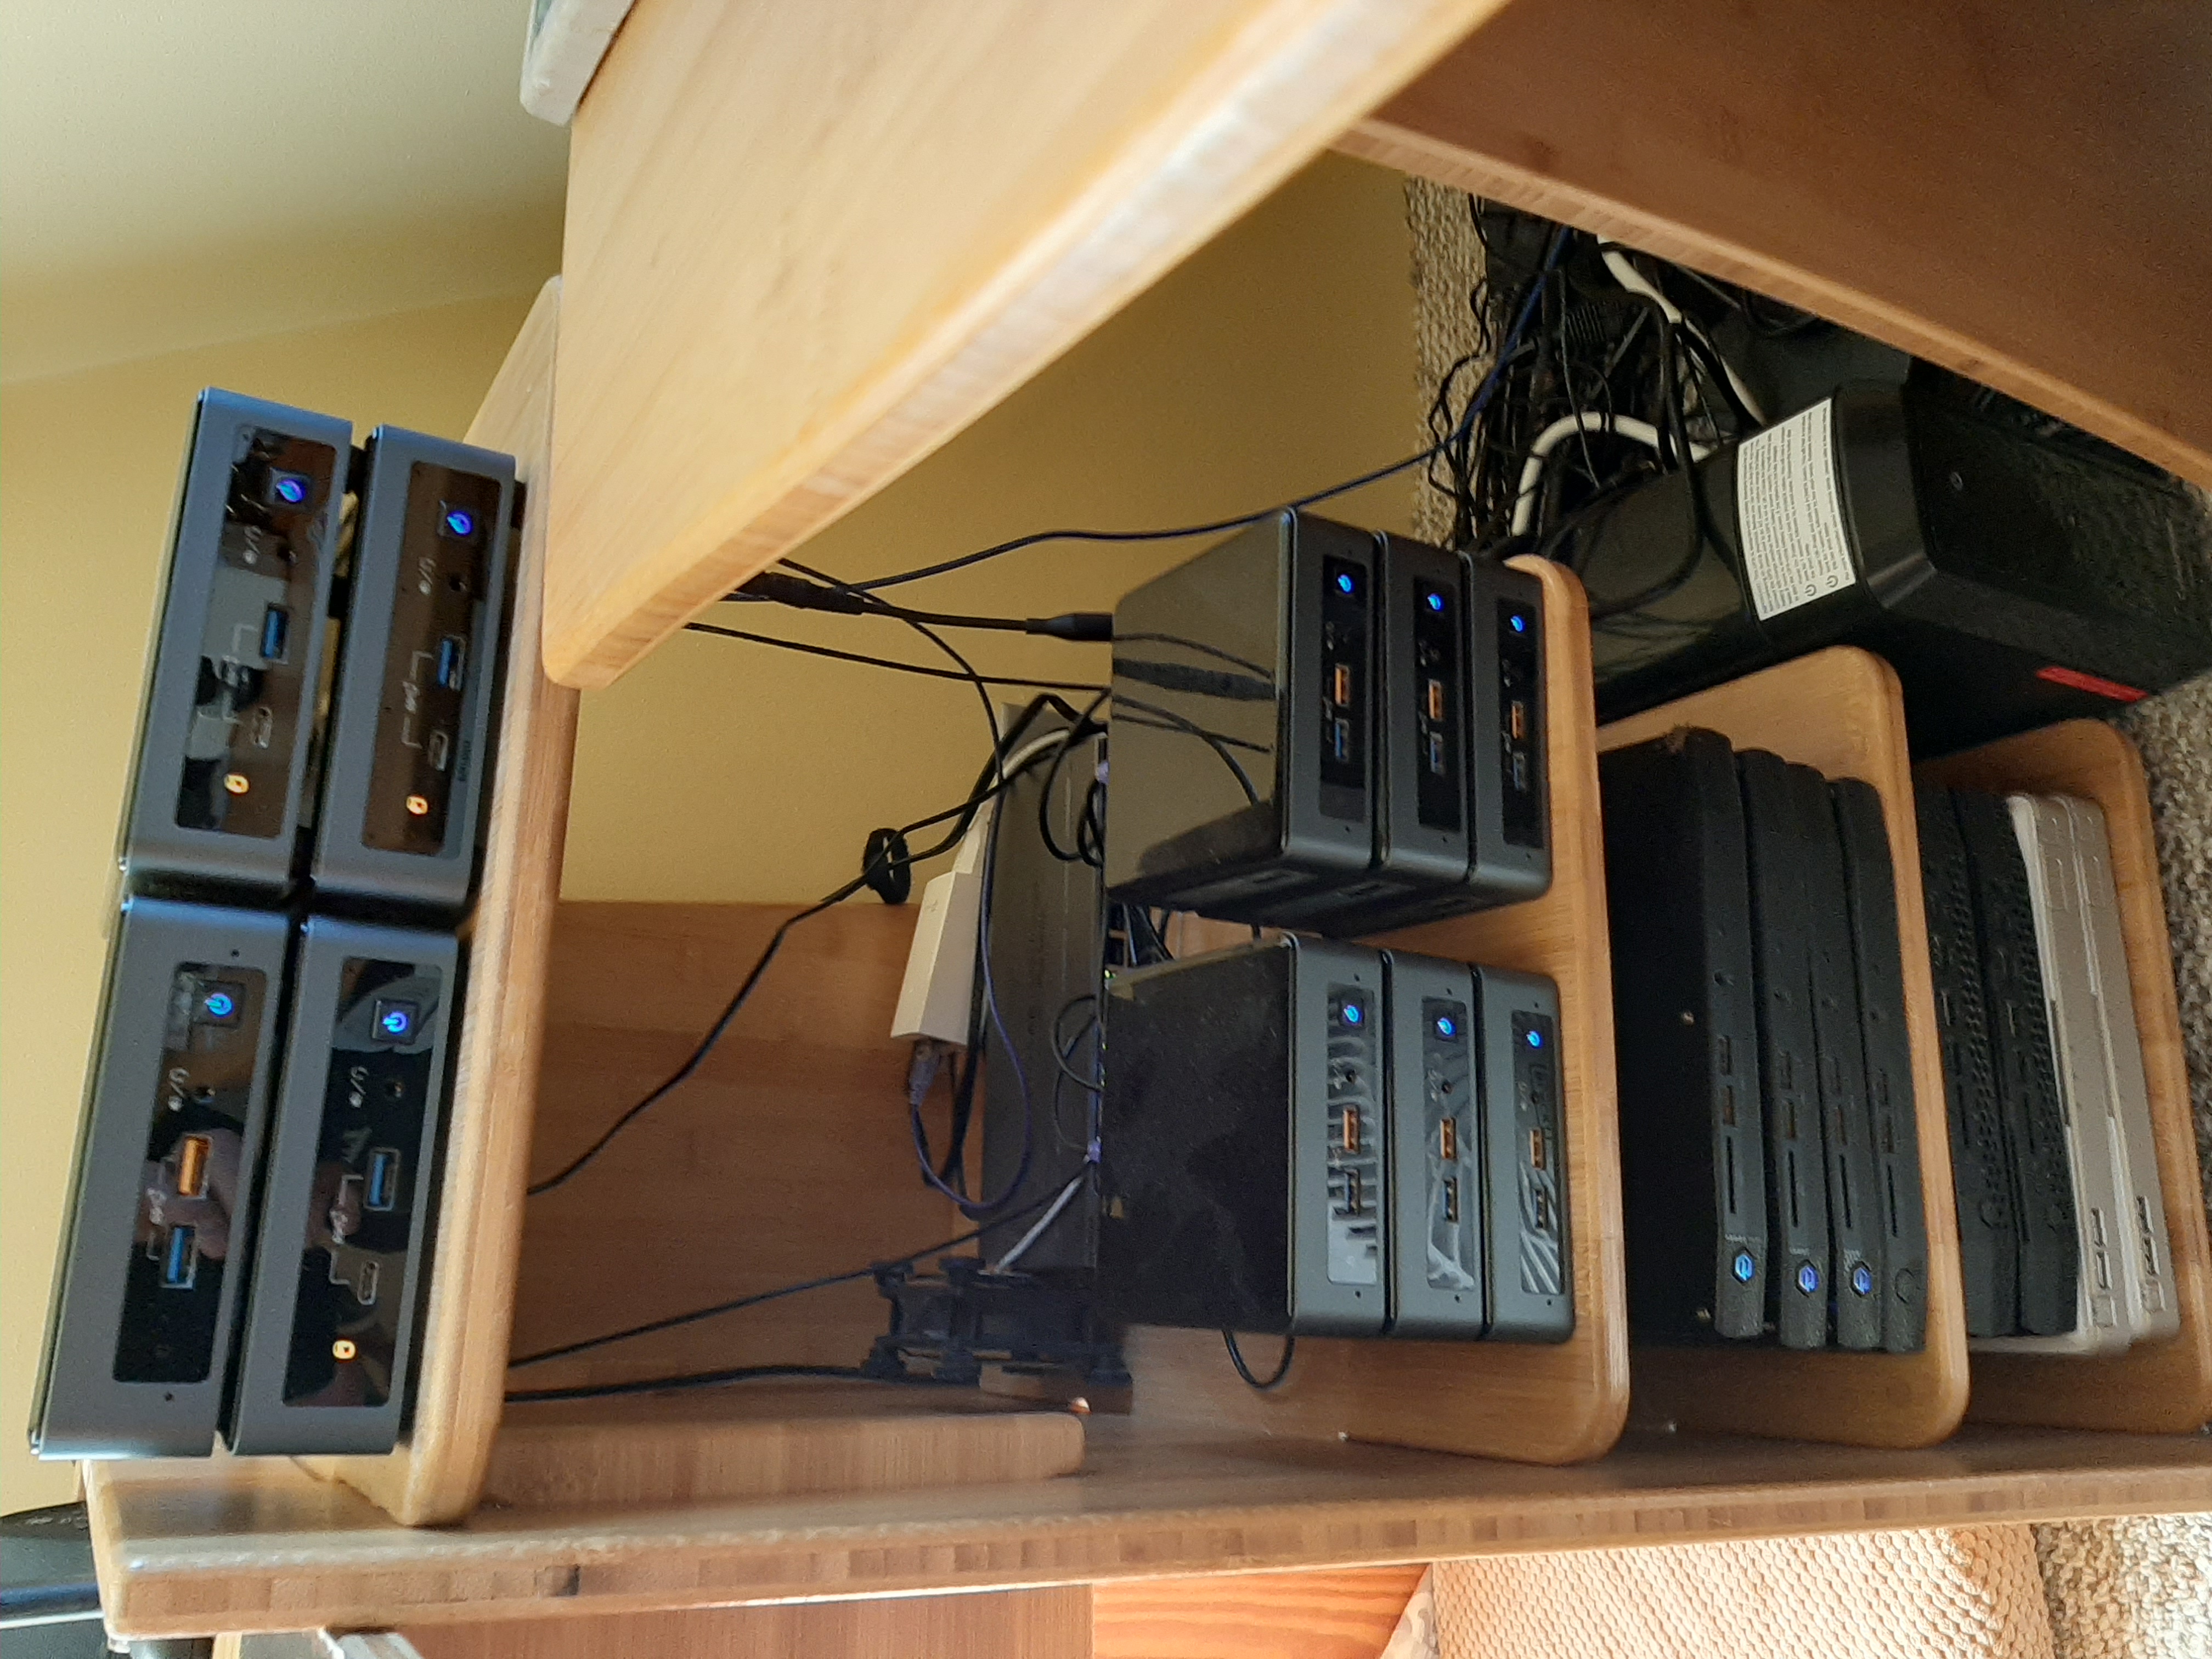 Picture of my home Lab - Yes, those are Looney Toons DVDs behind.